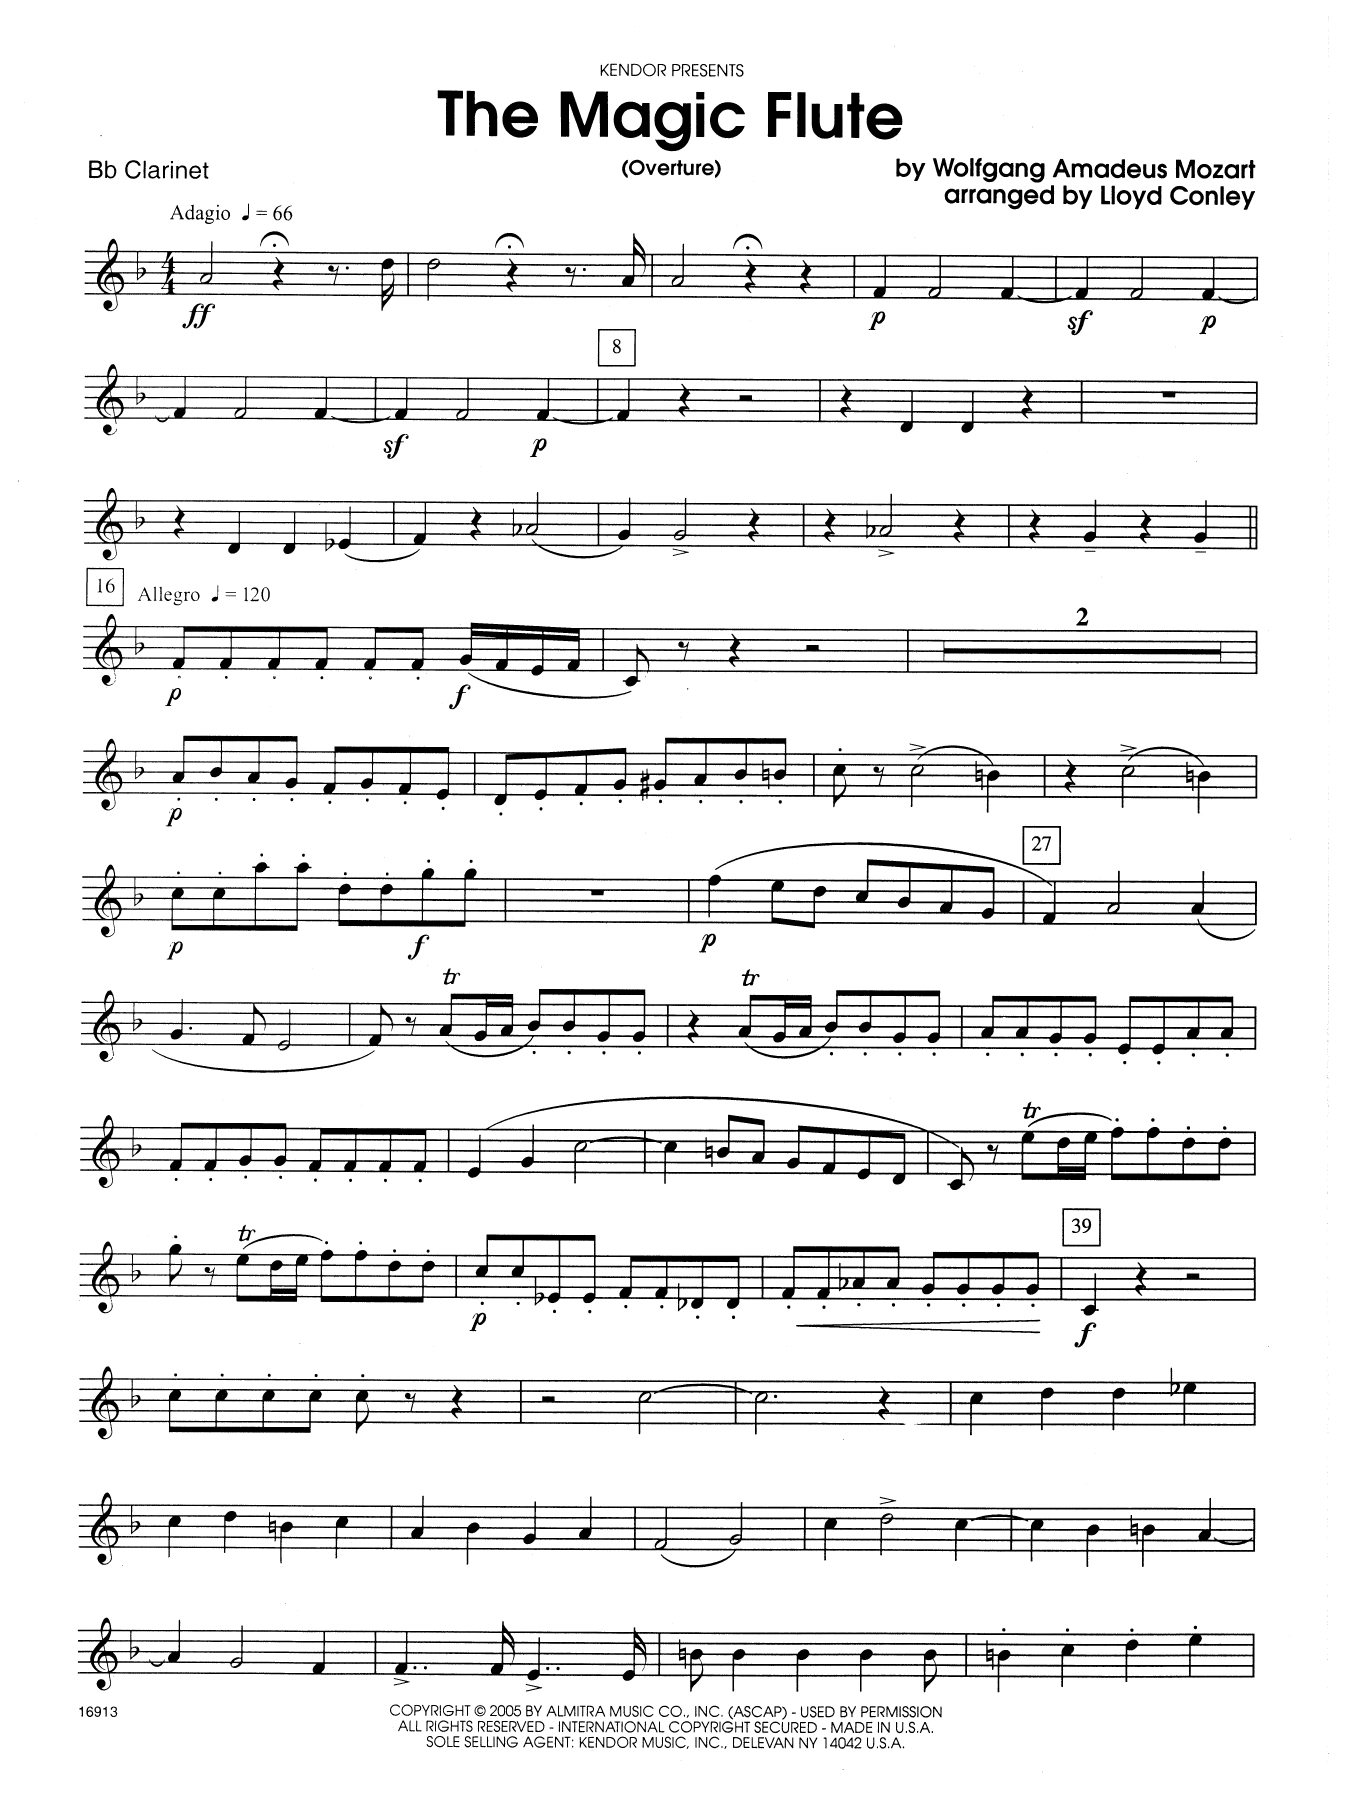 Lloyd Conley The Magic Flute (Overture) - Bb Clarinet sheet music notes and chords. Download Printable PDF.